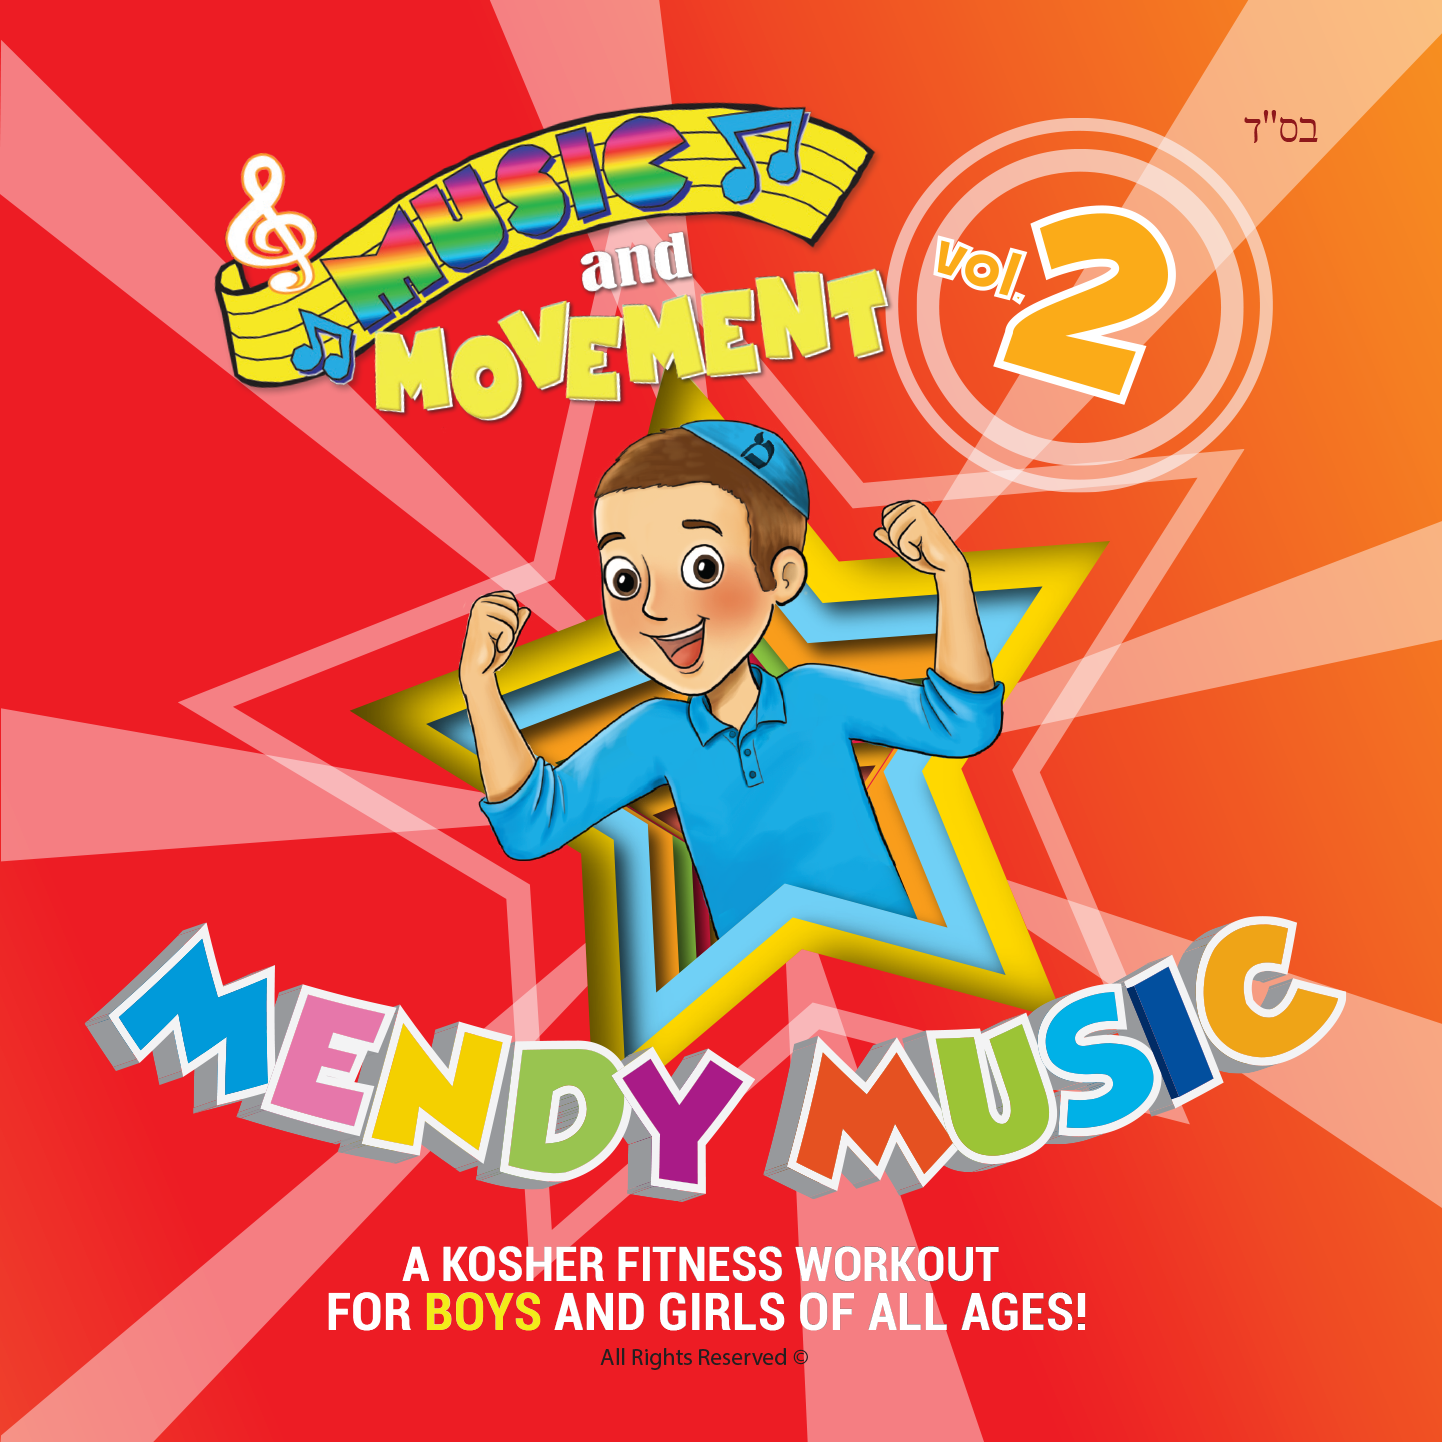 Mendy Music - Music and Movement Vol 2